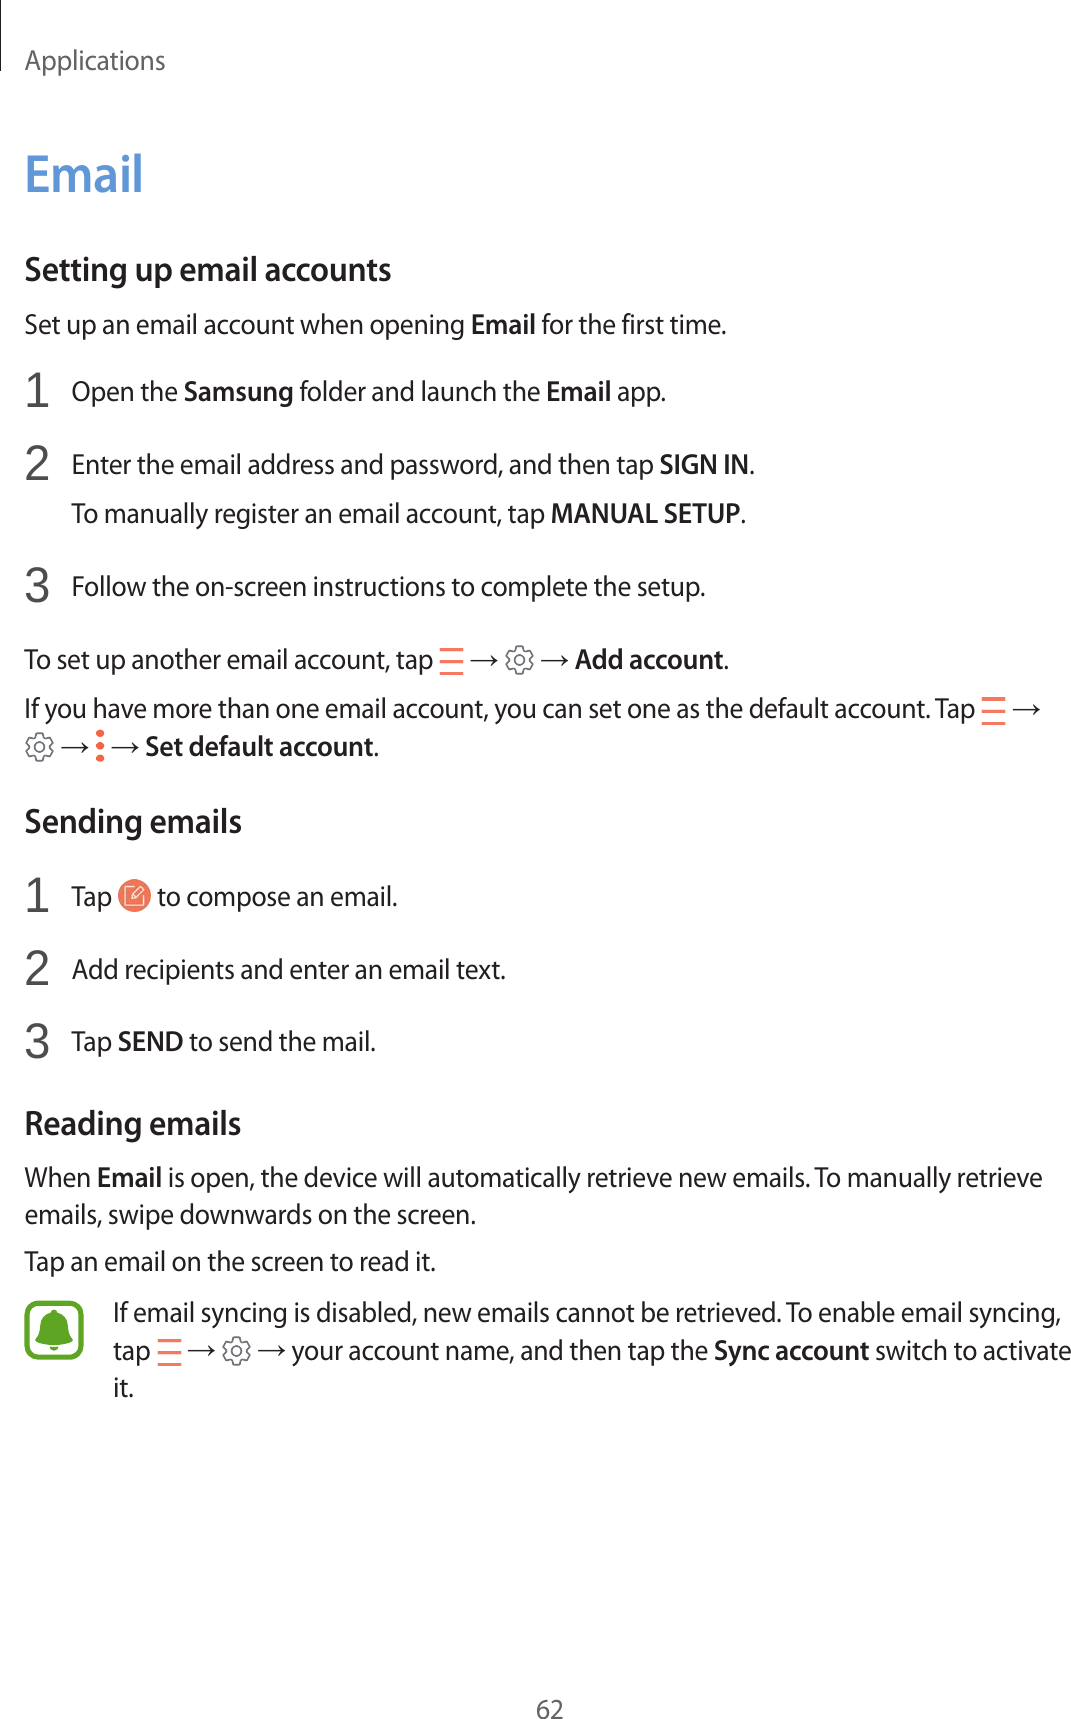 Applications62EmailSetting up email accountsSet up an email account when opening Email for the first time.1  Open the Samsung folder and launch the Email app.2  Enter the email address and password, and then tap SIGN IN.To manually register an email account, tap MANUAL SETUP.3  Follow the on-screen instructions to complete the setup.To set up another email account, tap   →   → Add account.If you have more than one email account, you can set one as the default account. Tap   →  →   → Set default account.Sending emails1  Tap   to compose an email.2  Add recipients and enter an email text.3  Tap SEND to send the mail.Reading emailsWhen Email is open, the device will automatically retrieve new emails. To manually retrieve emails, swipe downwards on the screen.Tap an email on the screen to read it.If email syncing is disabled, new emails cannot be retrieved. To enable email syncing, tap   →   → your account name, and then tap the Sync account switch to activate it.